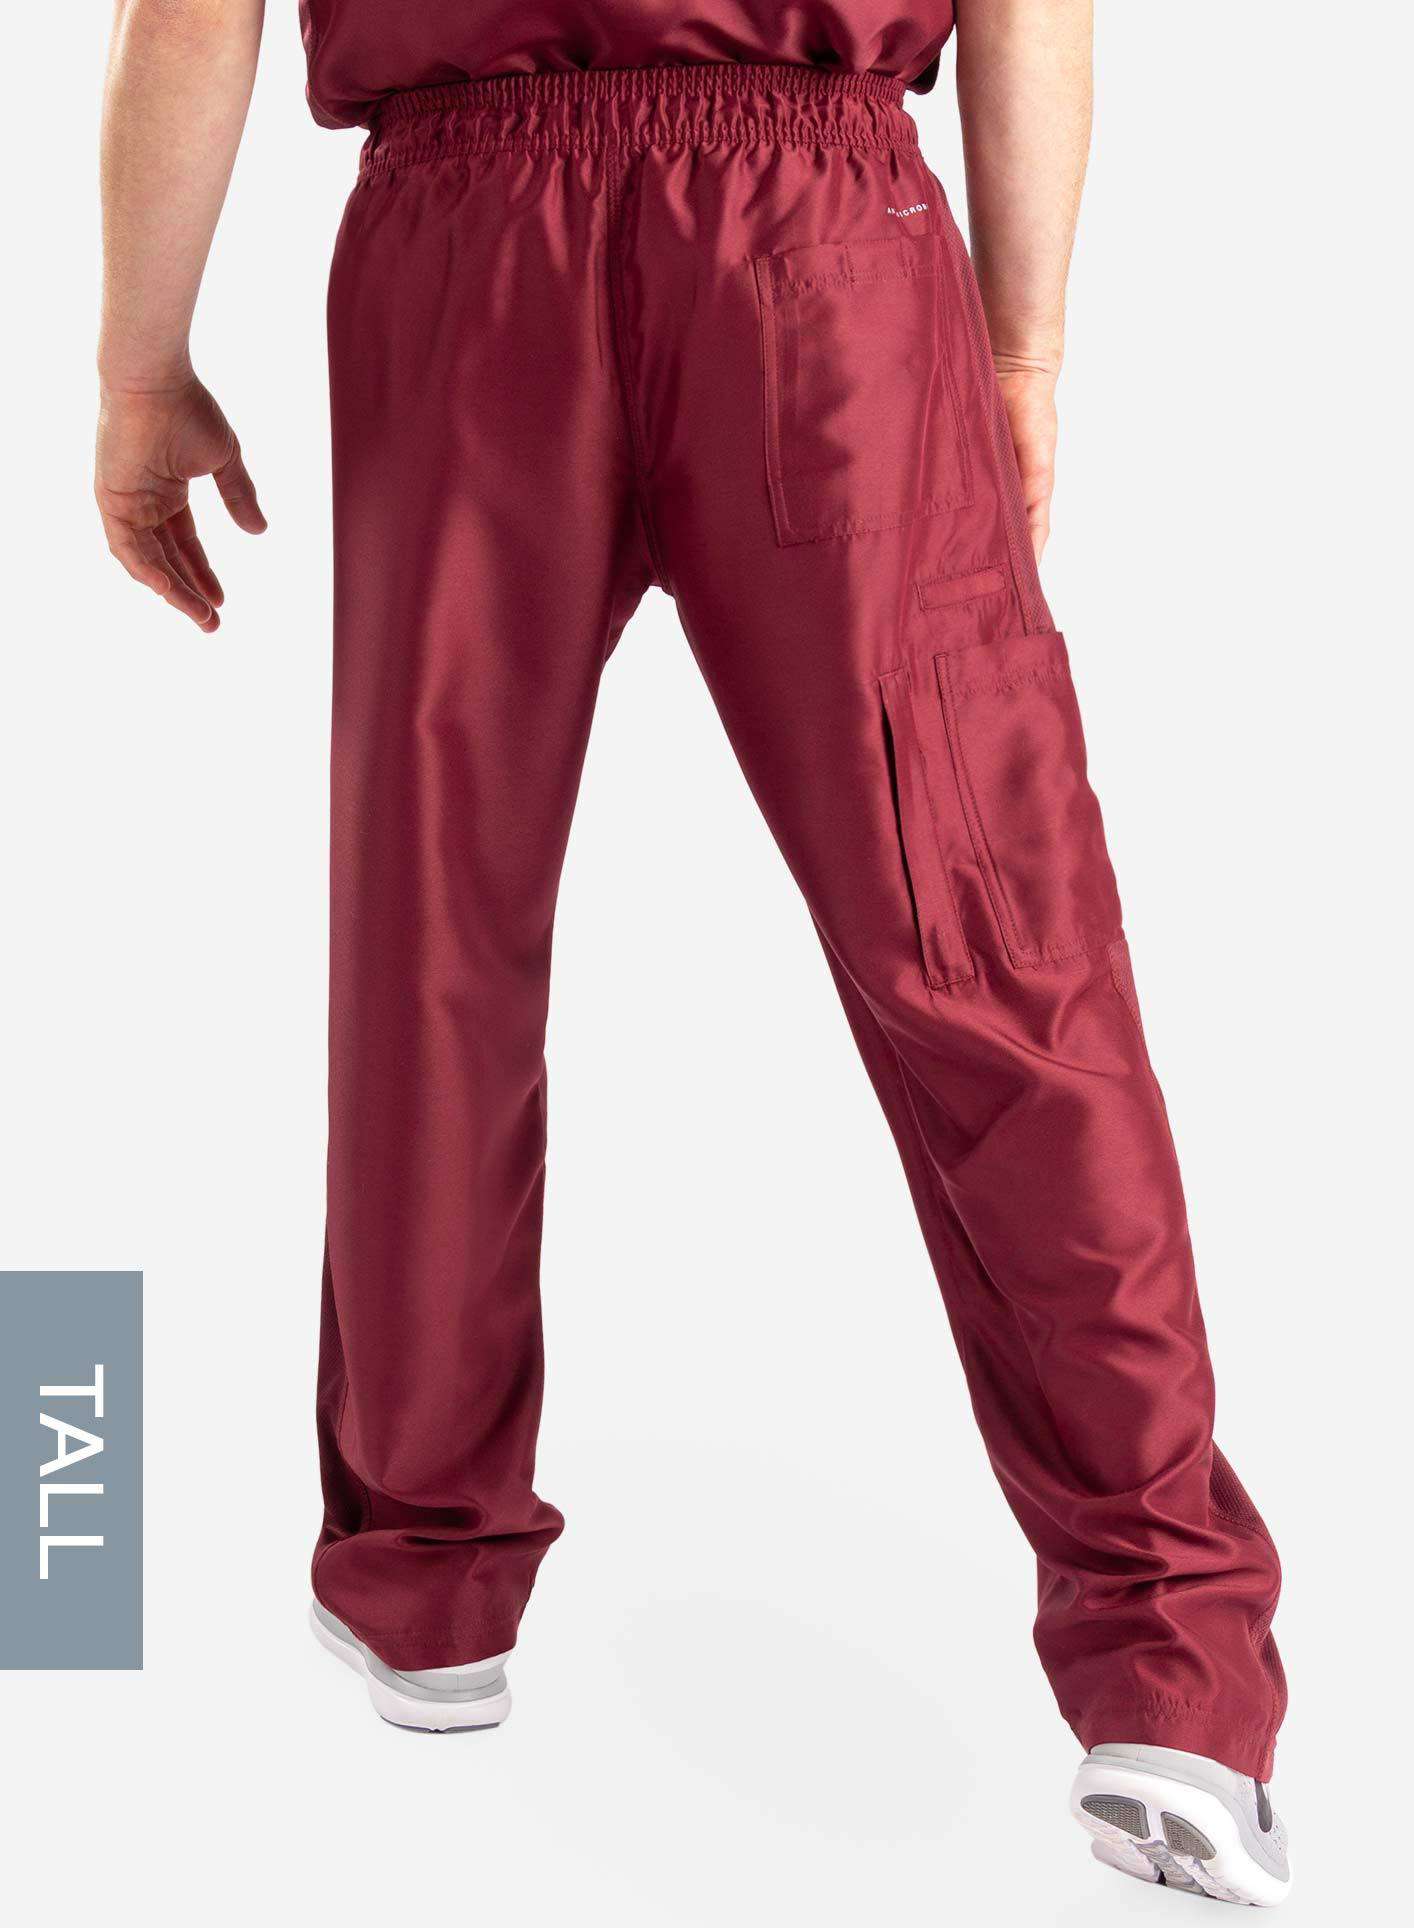 mens Elements tall relaxed fit scrub pants bold burgundy